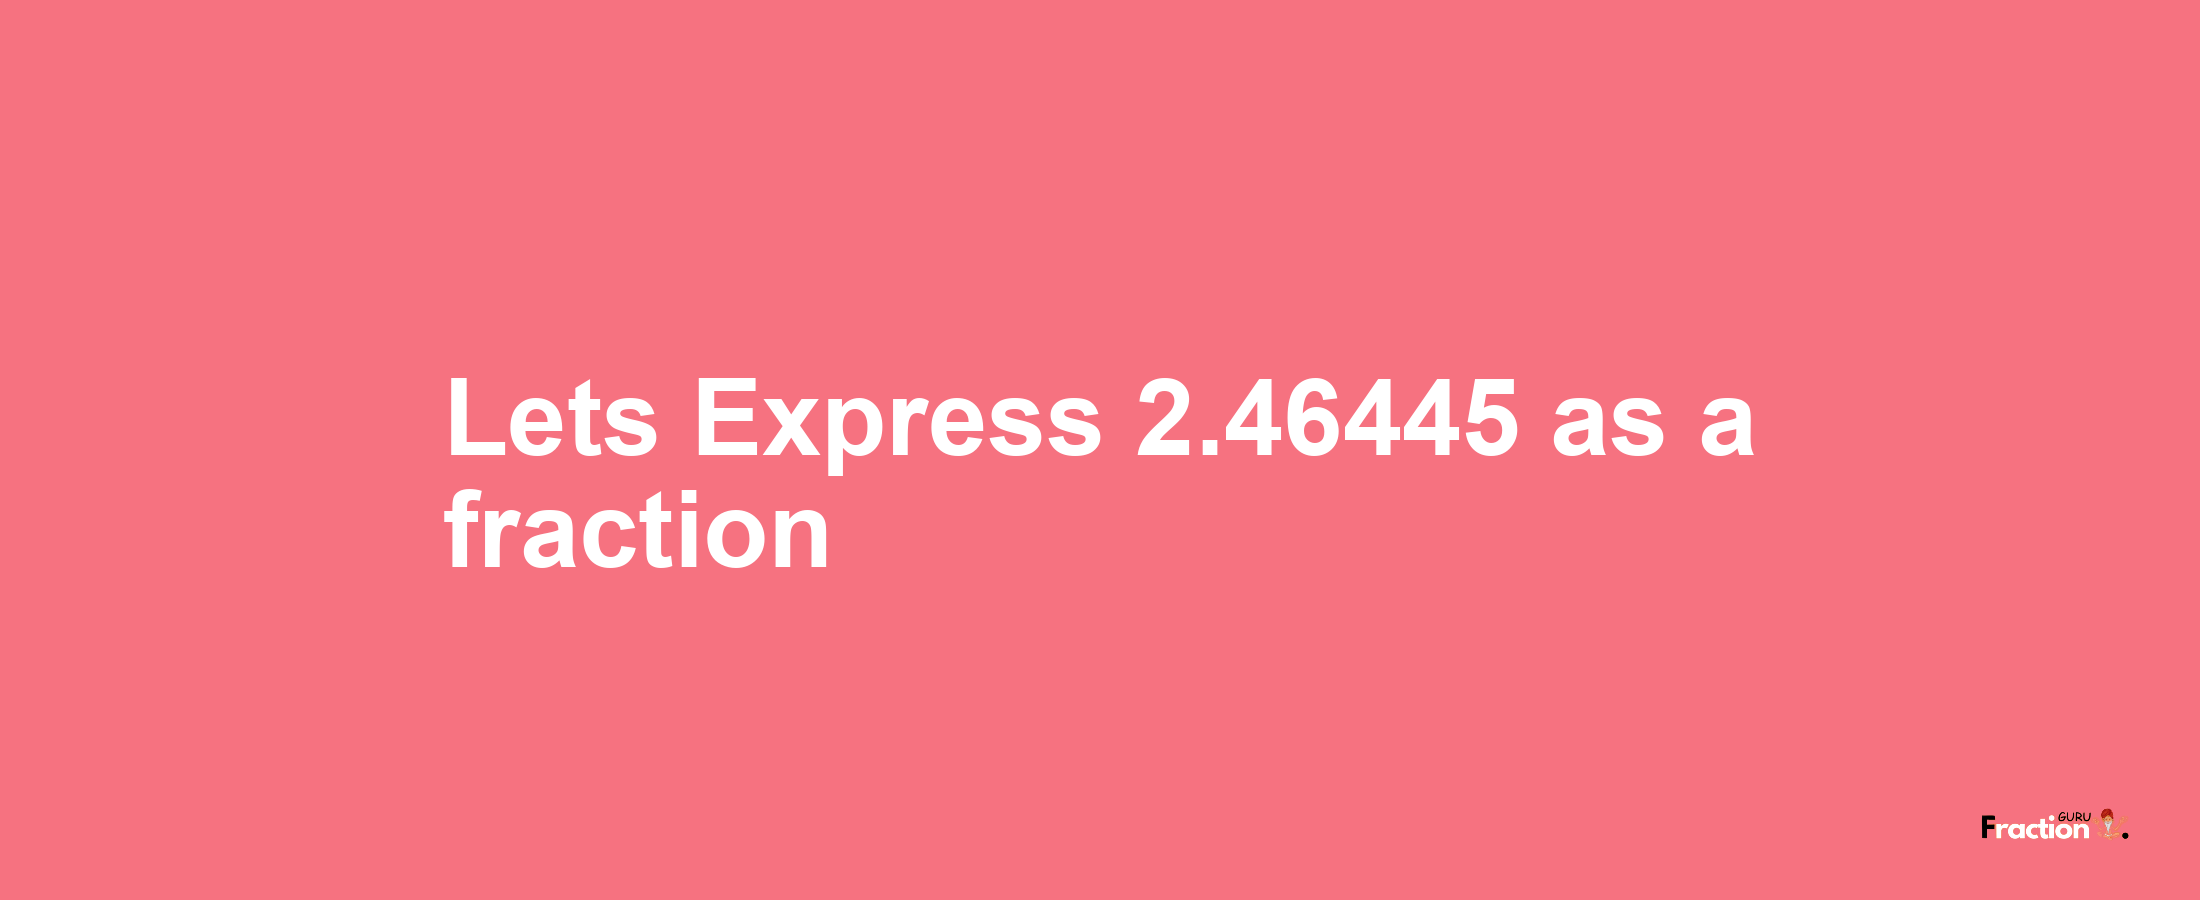 Lets Express 2.46445 as afraction